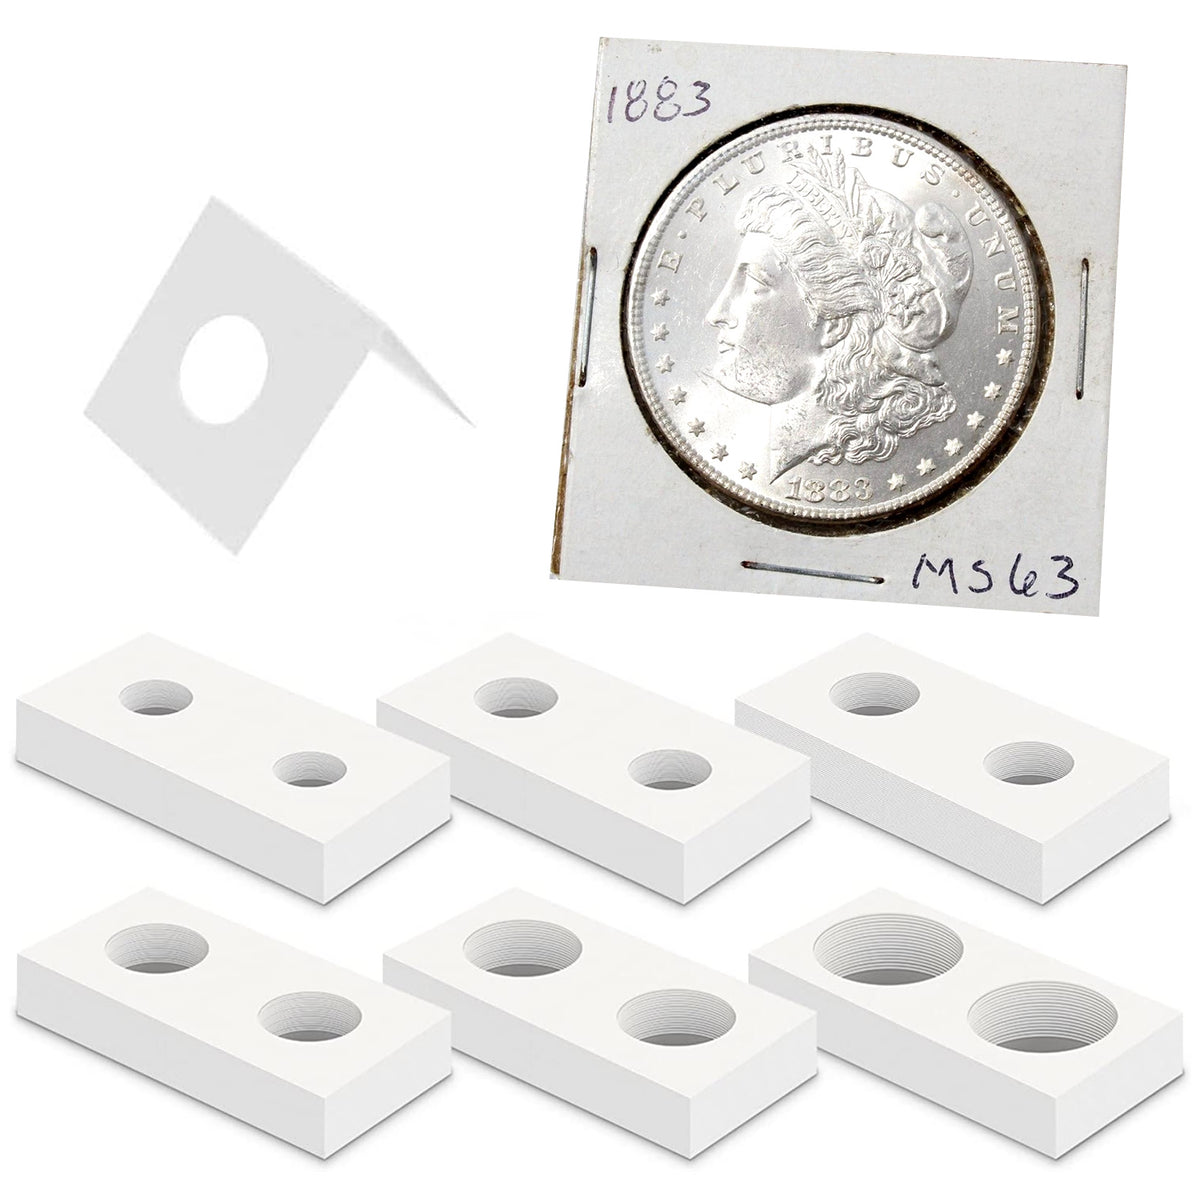 Favourde 300 Pieces Cardboard Coin Holder Flip Mega Assortment 2 by 2 inch for Coin Collection (6 Sizes)